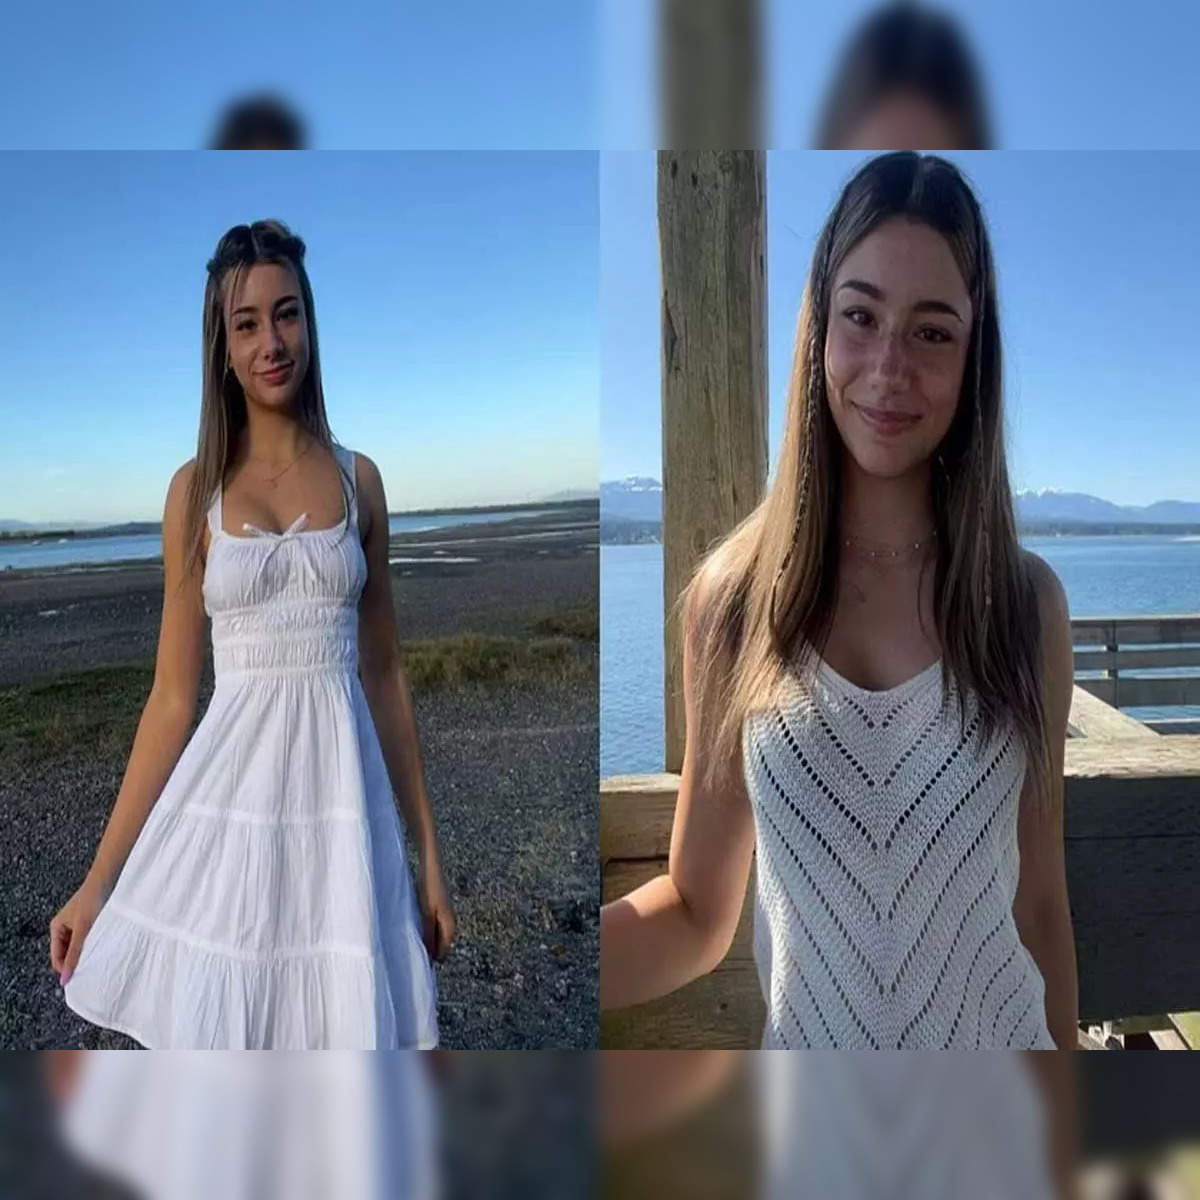 16 17 Saal Ladki Sexy Picture - Mikayla Campinos: 16-year-old TikTok star Mikayla Campinos dead? Know about  her viral video - The Economic Times